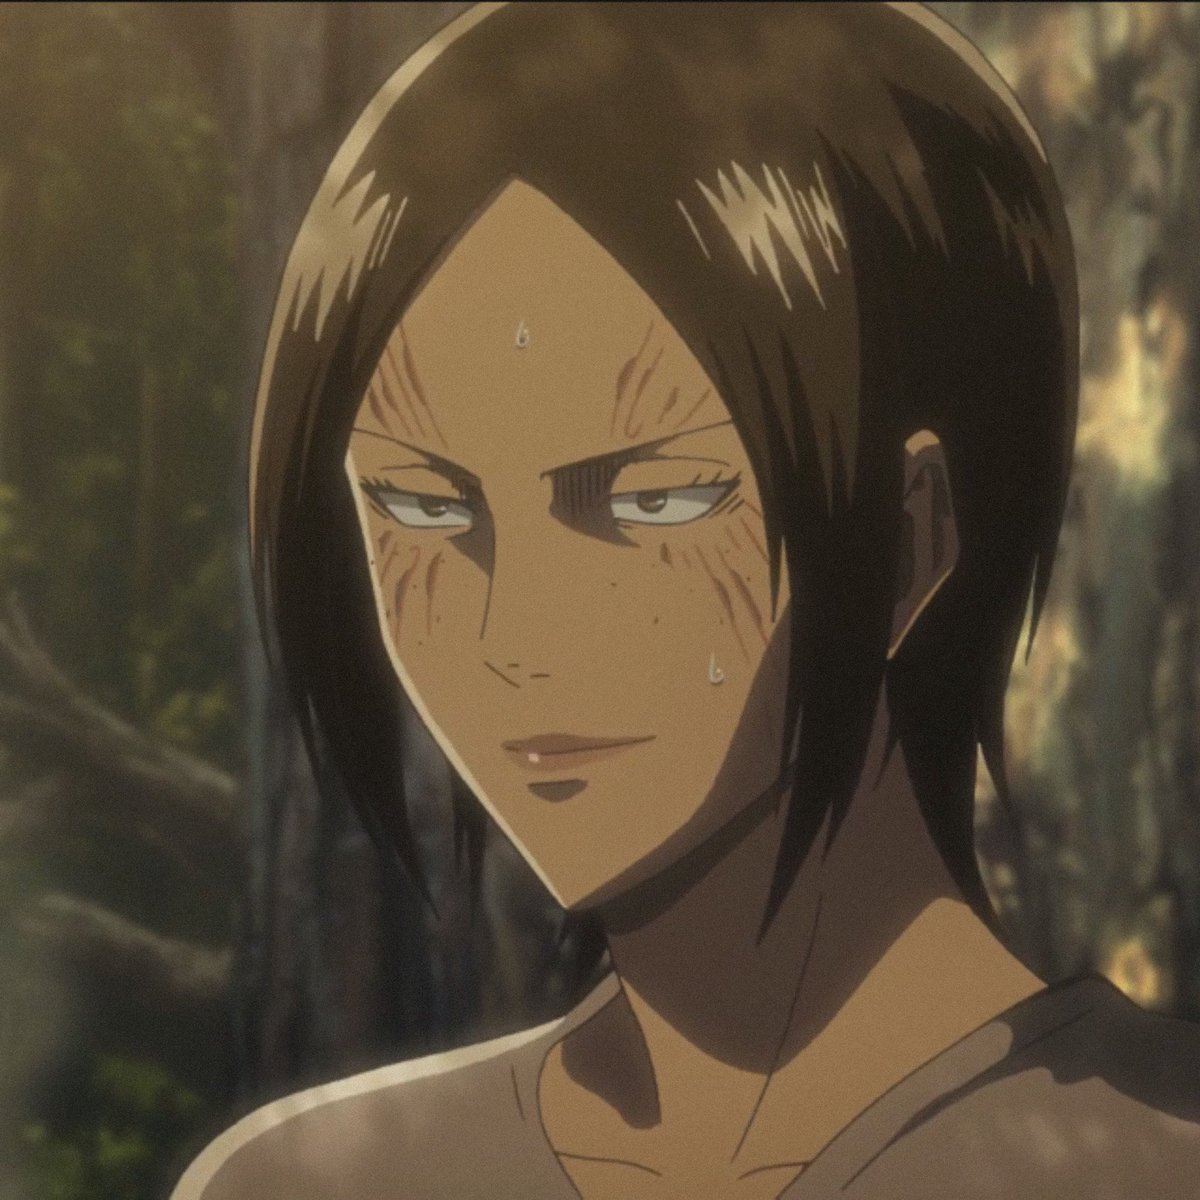 ymir from attack on titan